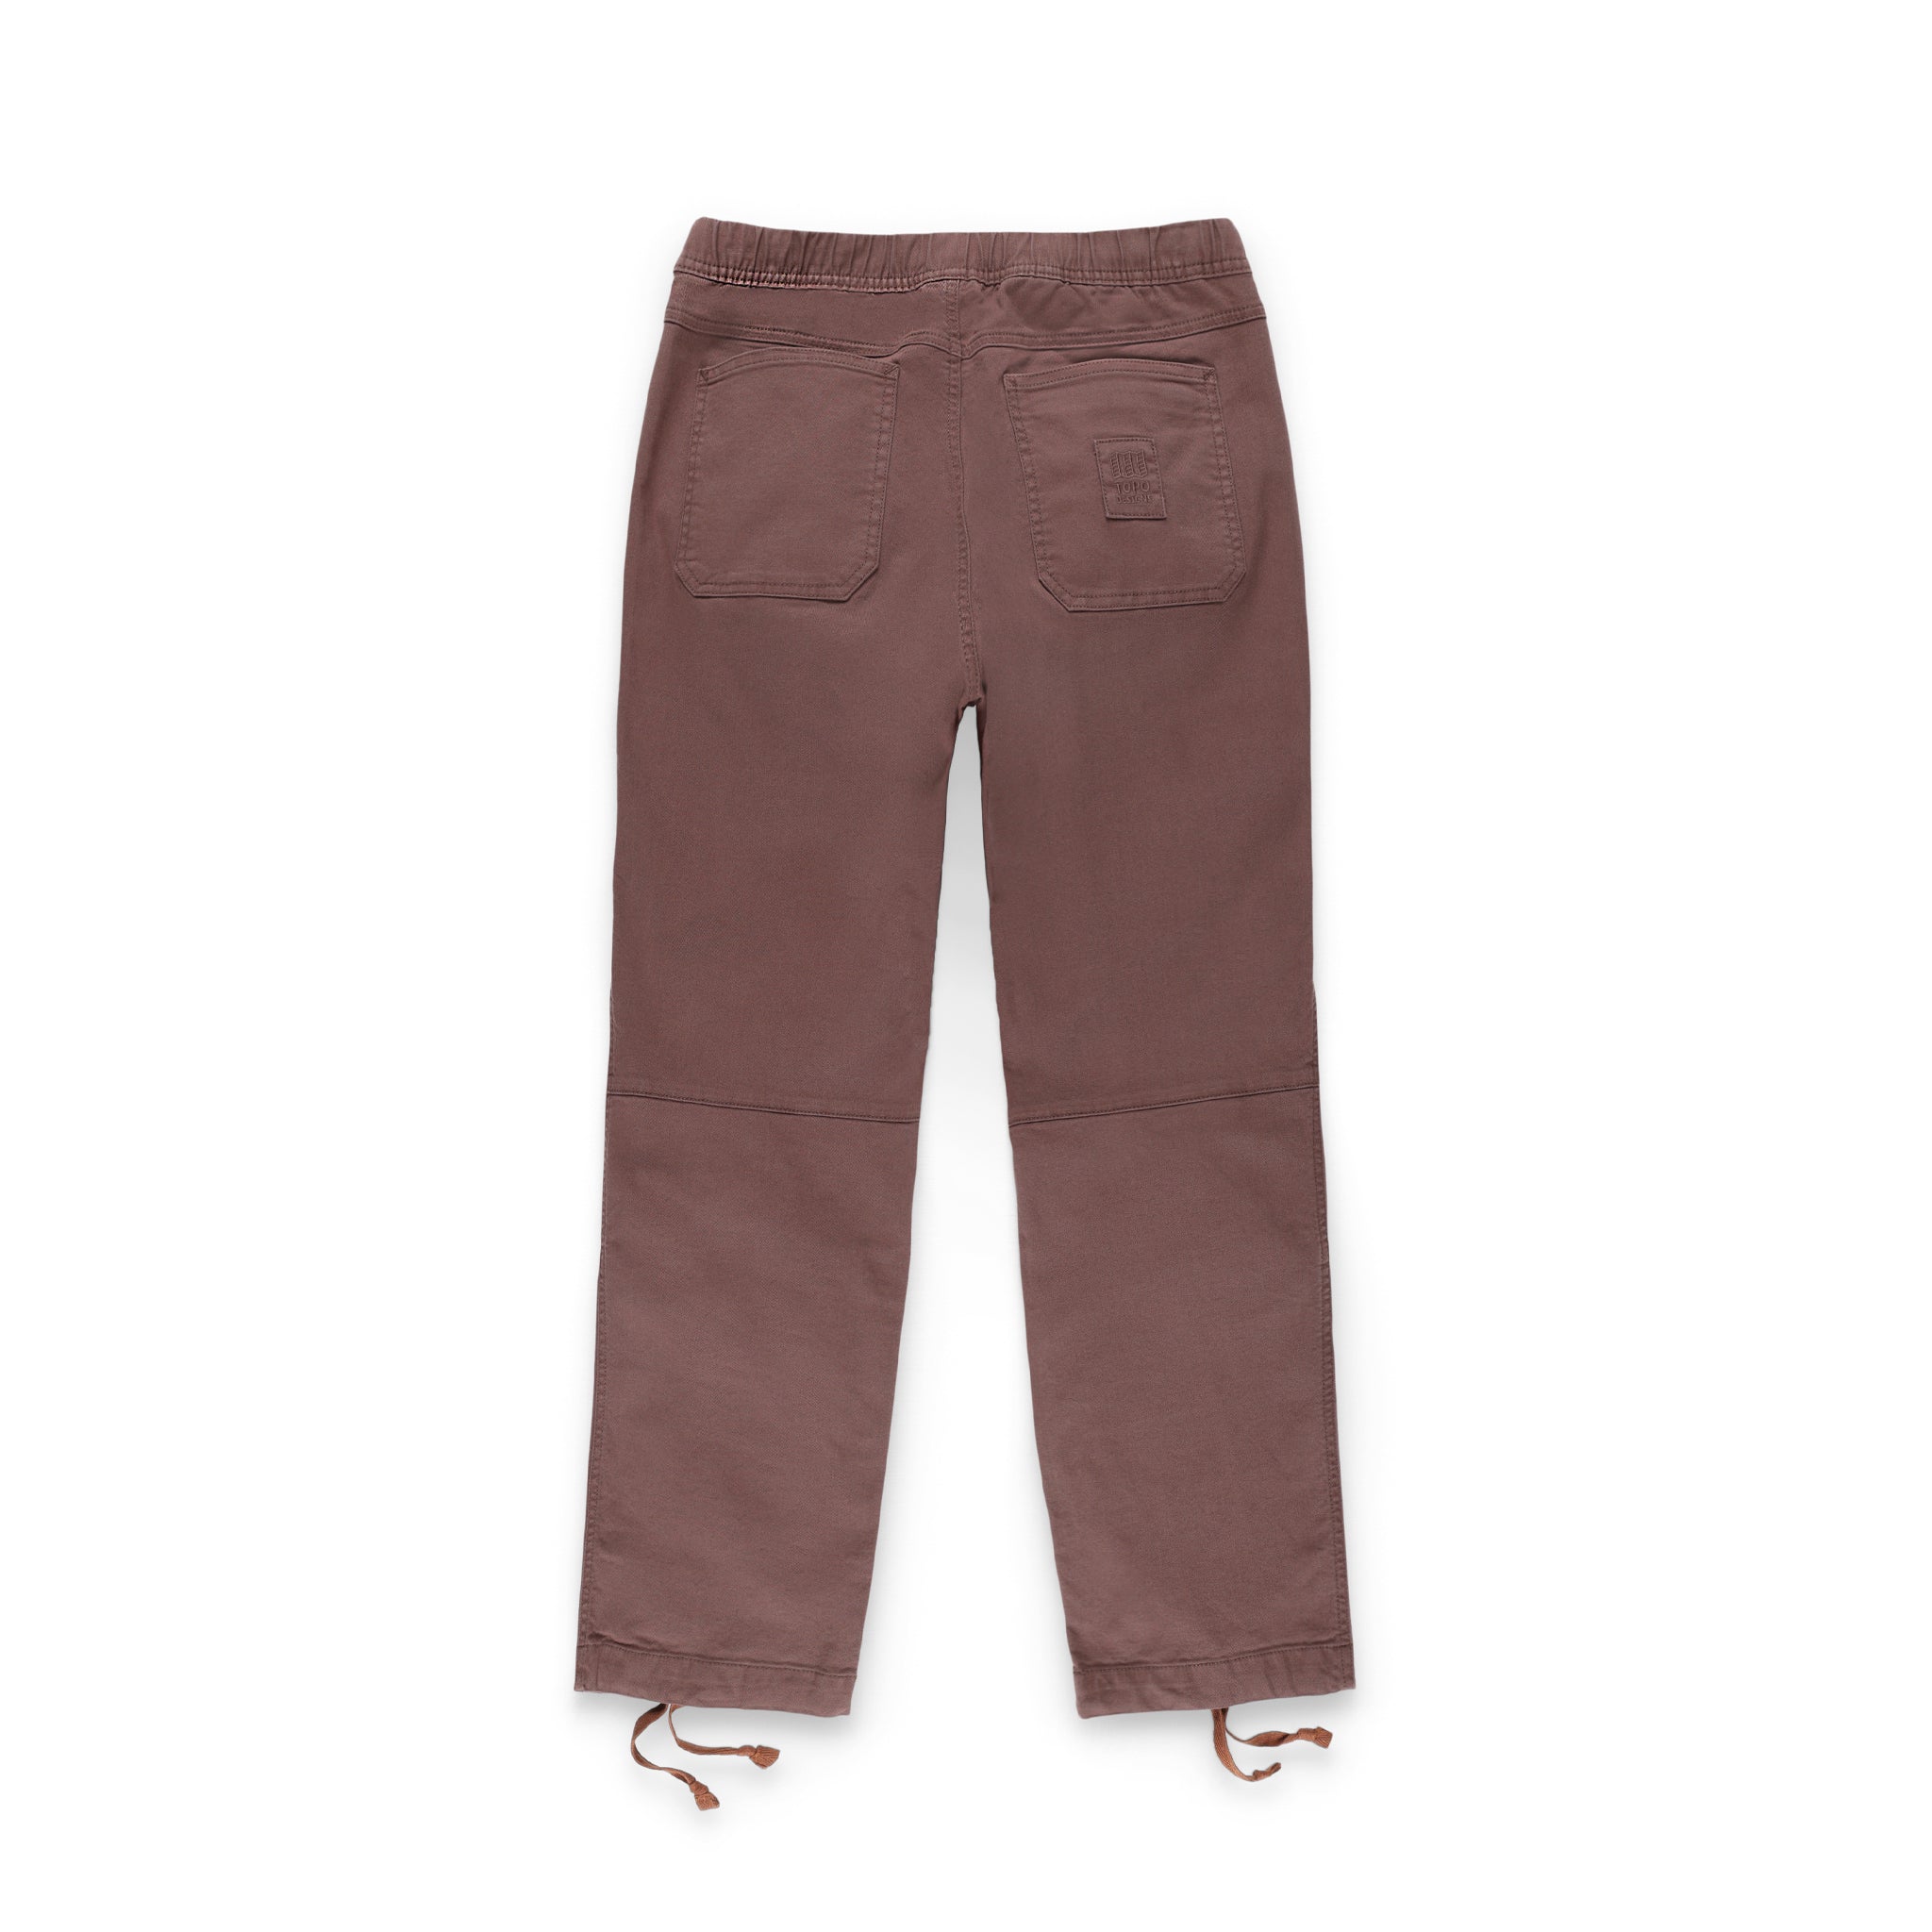 Back pockets on Topo Designs Women's Dirt Pants sustainable 100% organic cotton drawstring in "Peppercorn" brown.